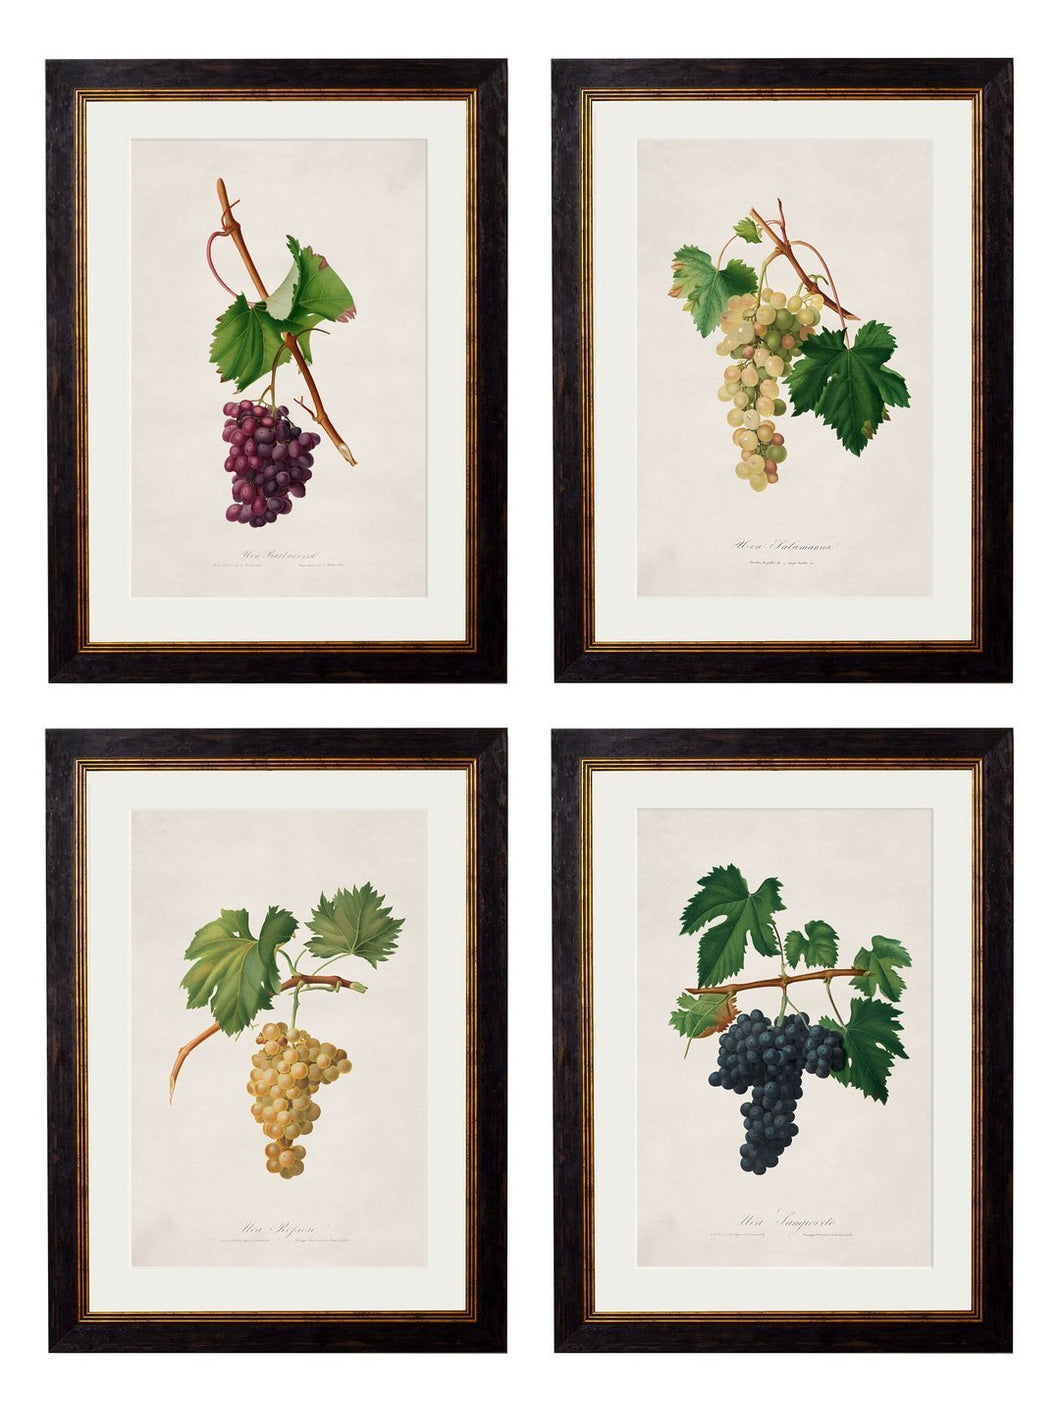 Framed Collection of Botanical Grapes - Referenced From 1800s French PrintsVintage FrogPictures & Prints